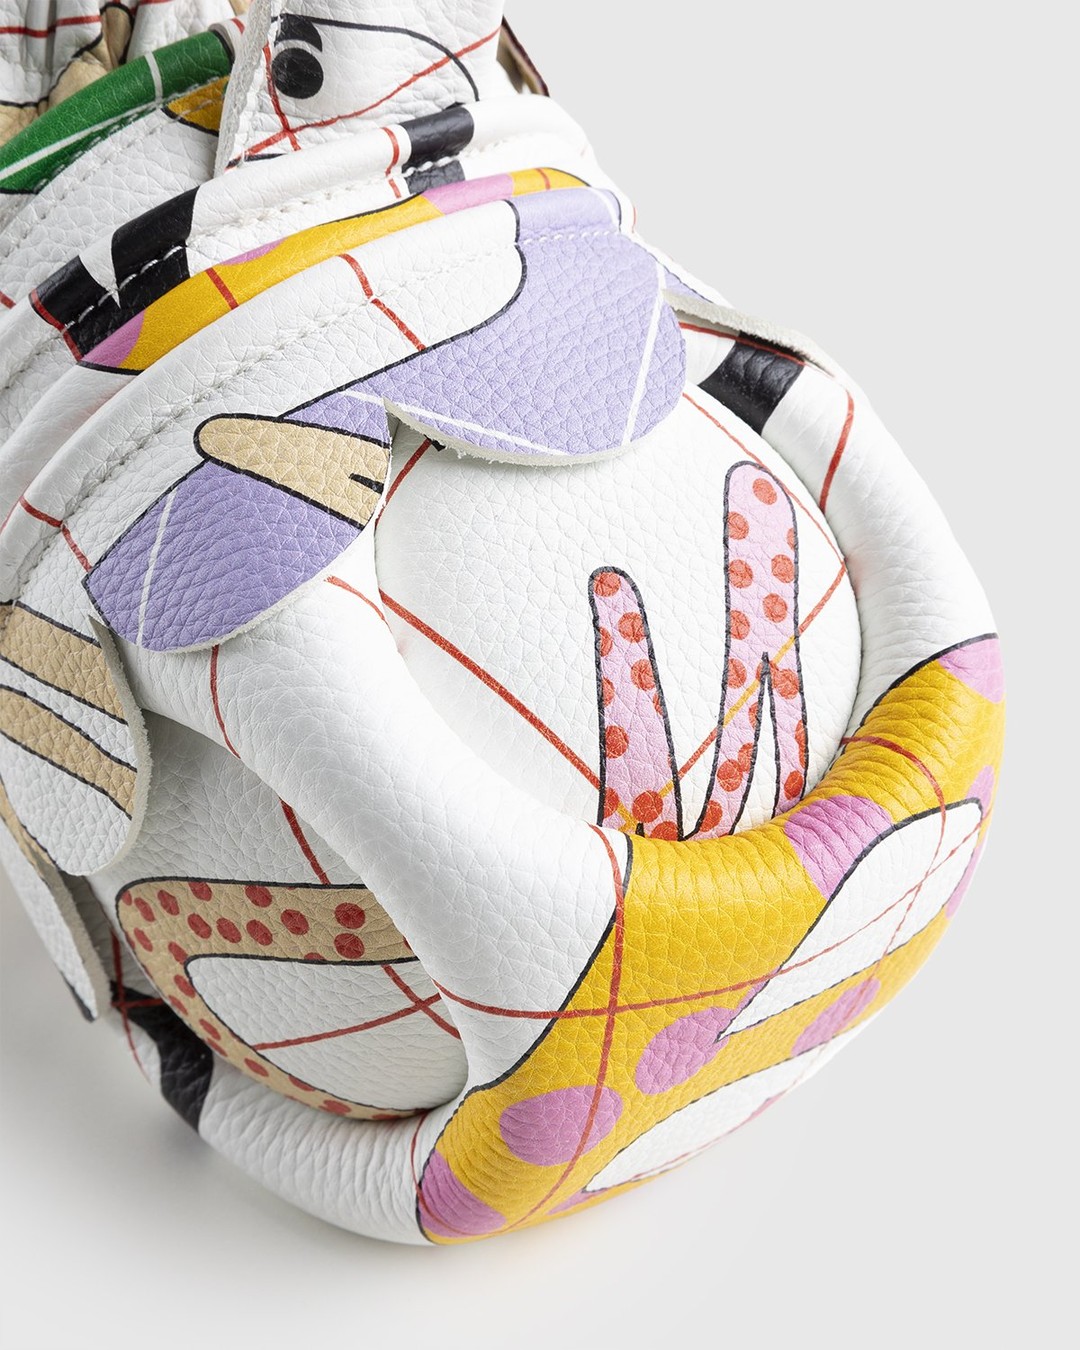 Nora Turato x Ecco Leather x Nicchi x Highsnobiety – Boomblaster Infinity Pool Dragon Toes Bag - Shoulder Bags - White - Image 4